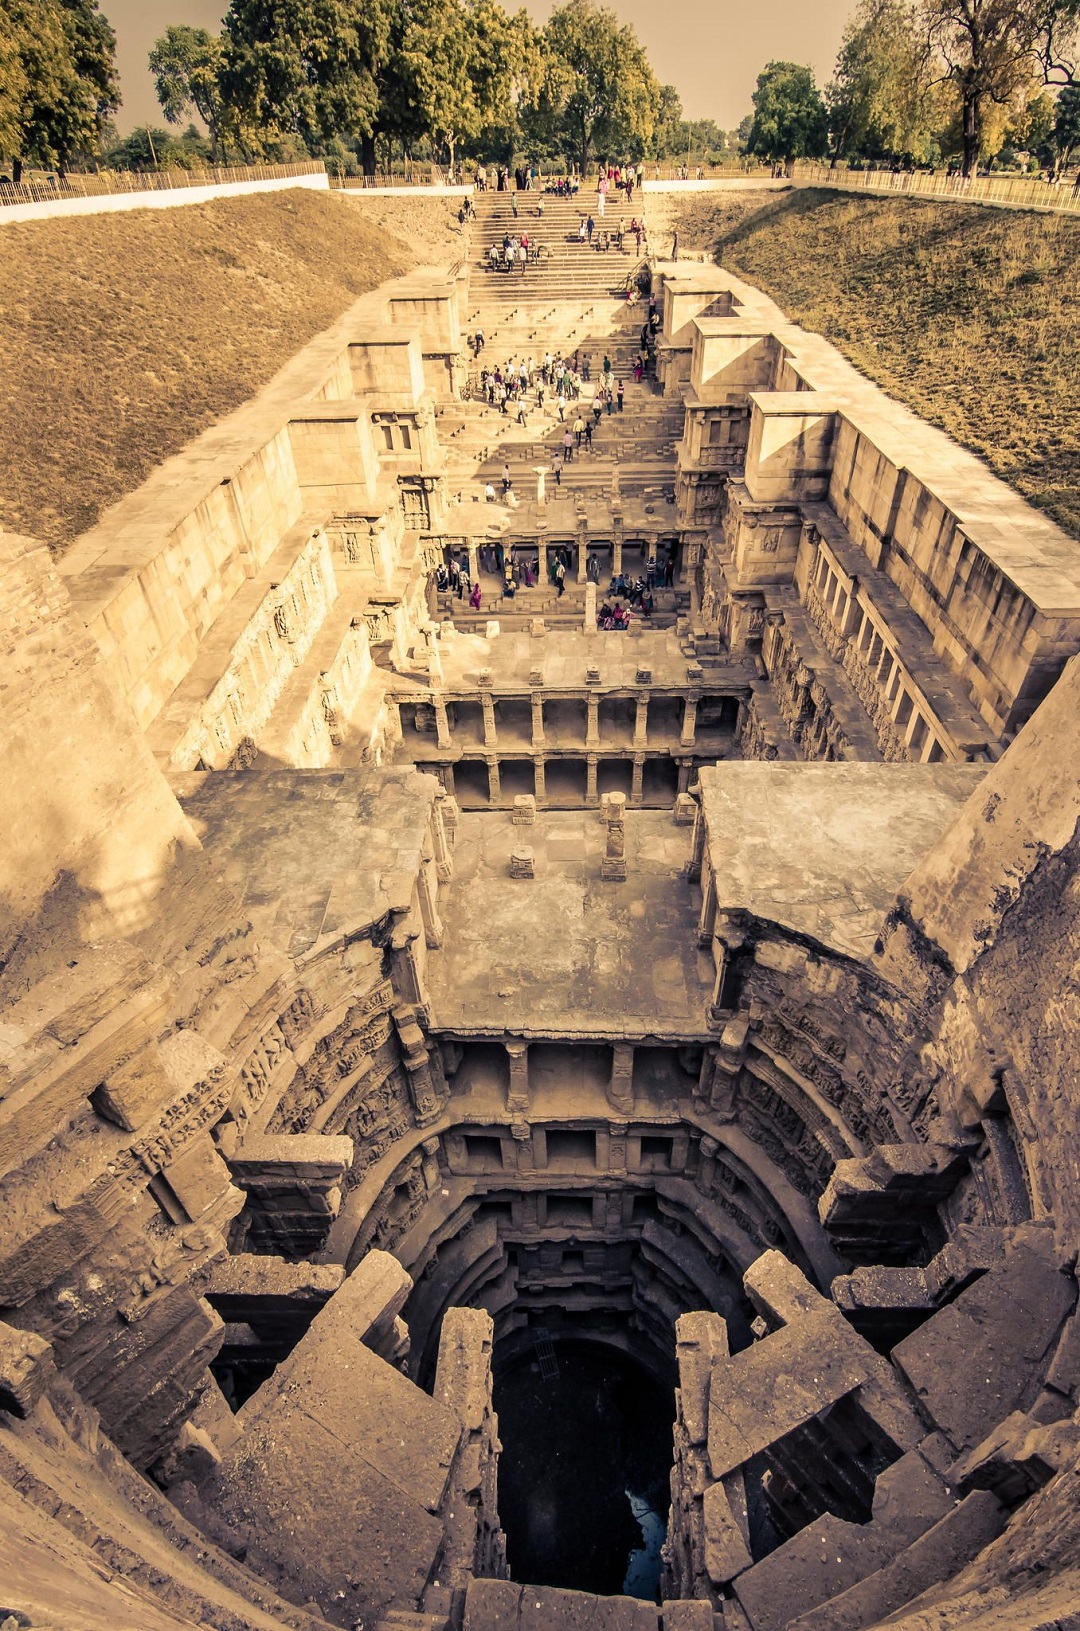 Rani-Ki-Vav, On The Banks Of The Saraswati River, Was Initially Built As A Memorial To A King In The 11th Century Ad